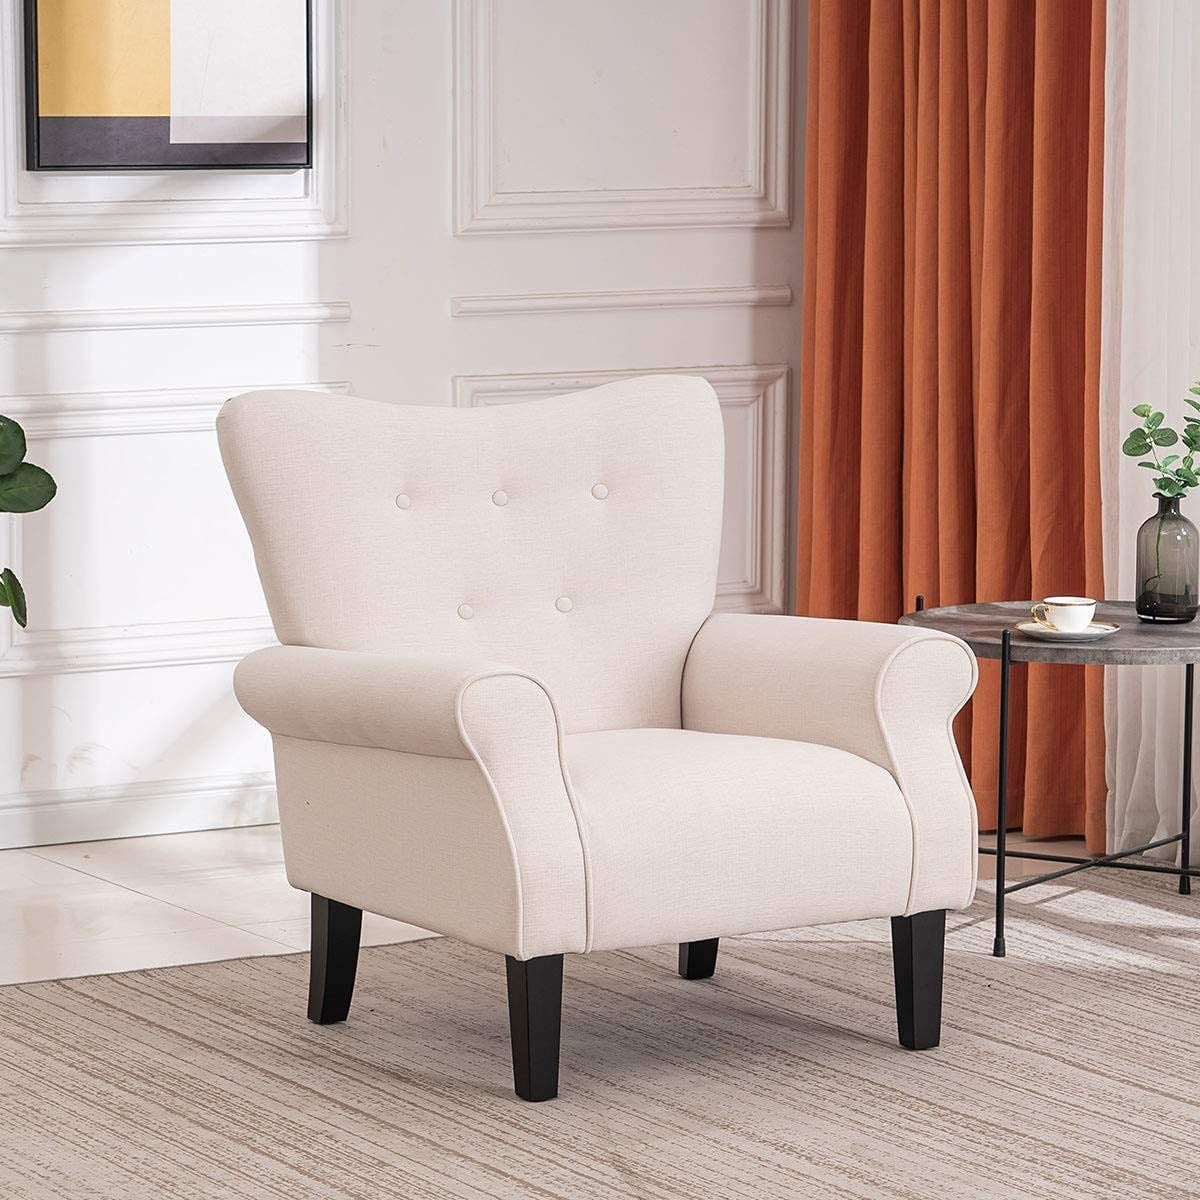 Erommy Wing back Arm Chair, Upholstered Fabric High Back Chair with ...